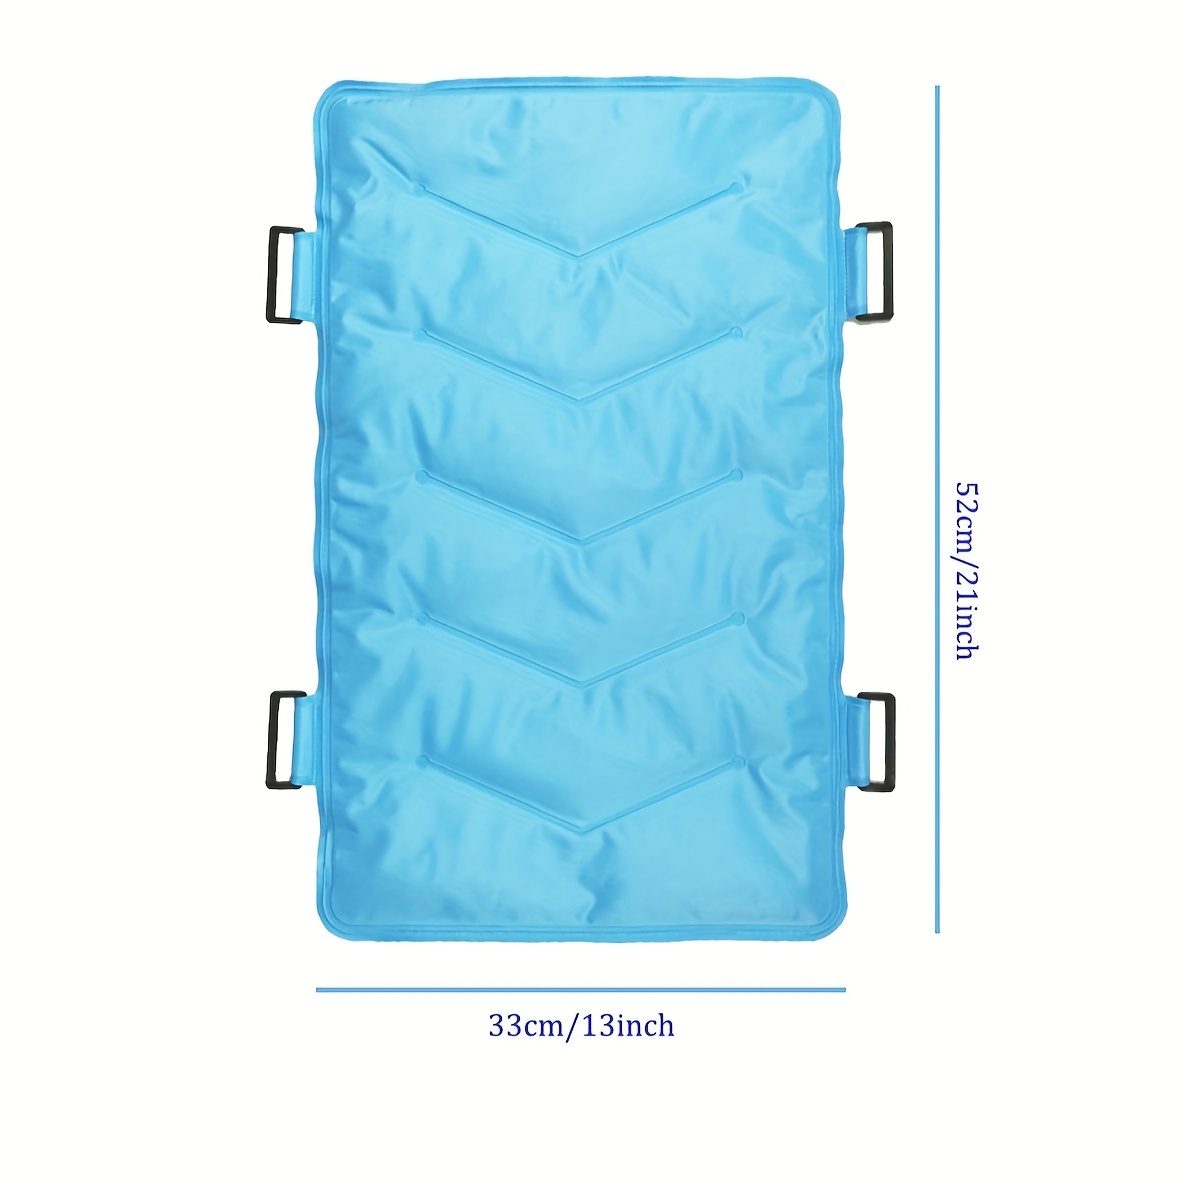 Extra Large & Reusable Ice Pack (15 x 23.5 Inches, XL) for Maximum Back and Full Body Pain Relief from Injuries, Swelling, Bruises, Sprains | Ice